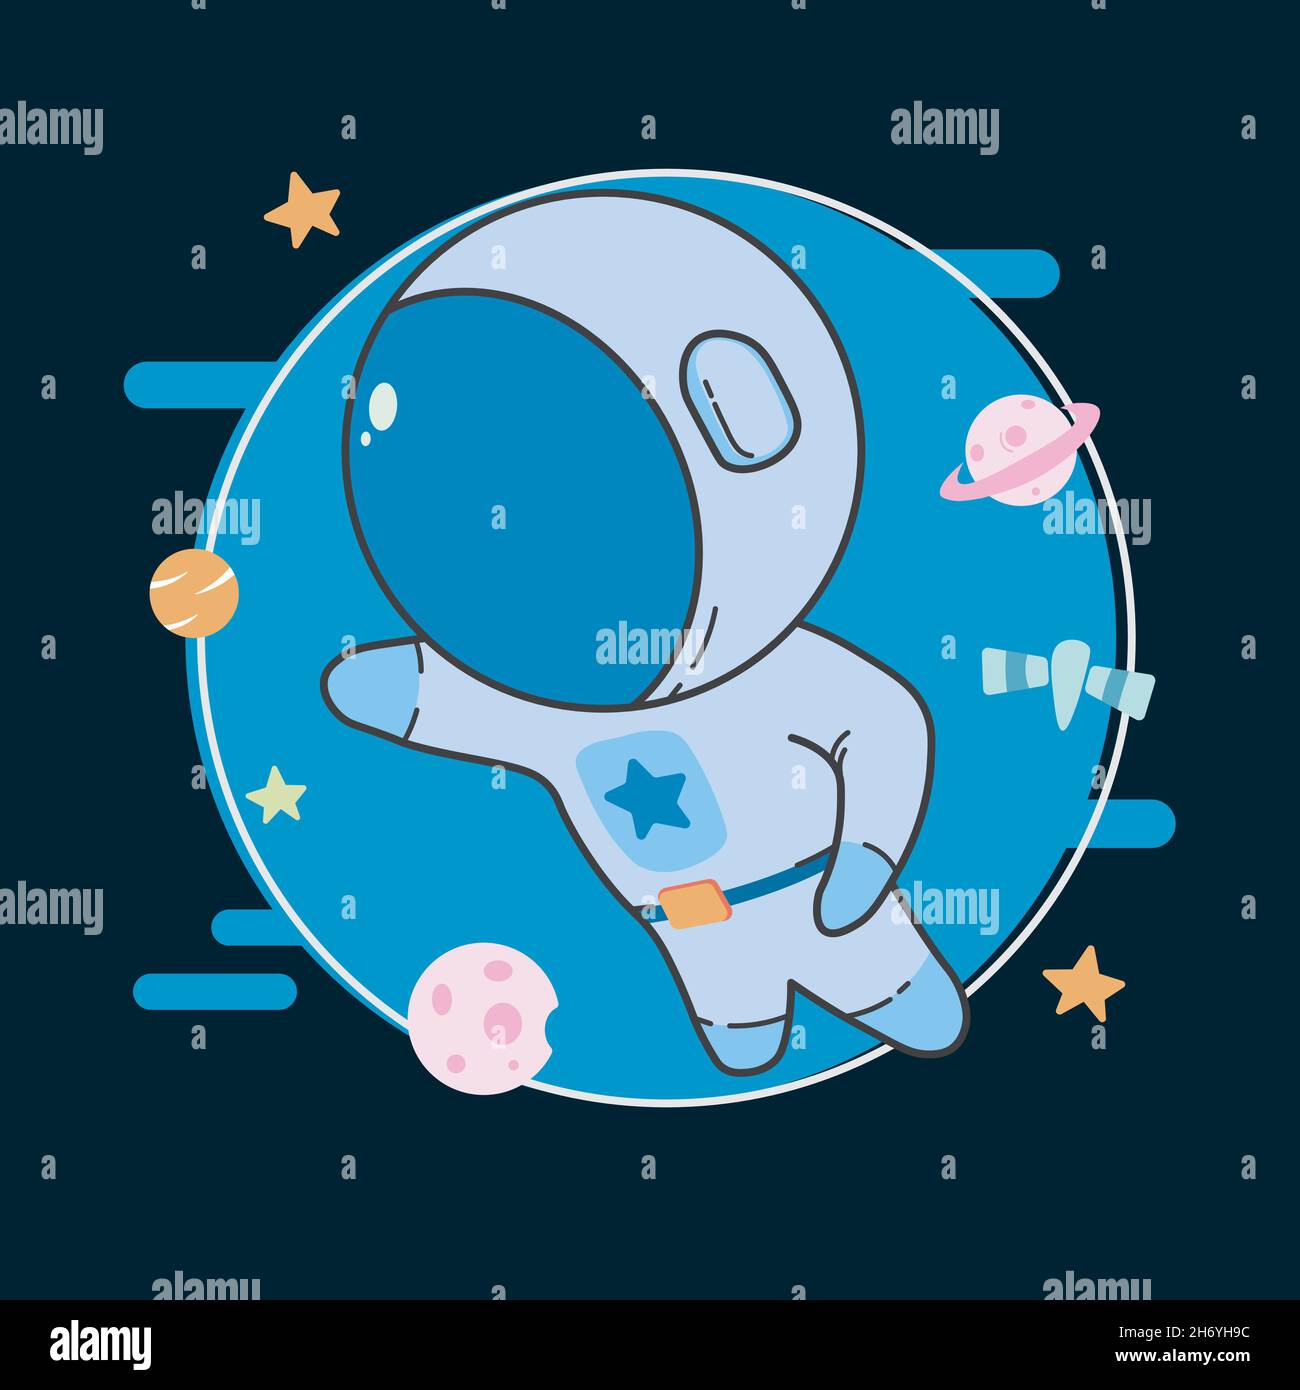 Vector illustration of cute characters dressed as astronauts, flying around planets, stars, satellites, and asteroids. Stock Vector